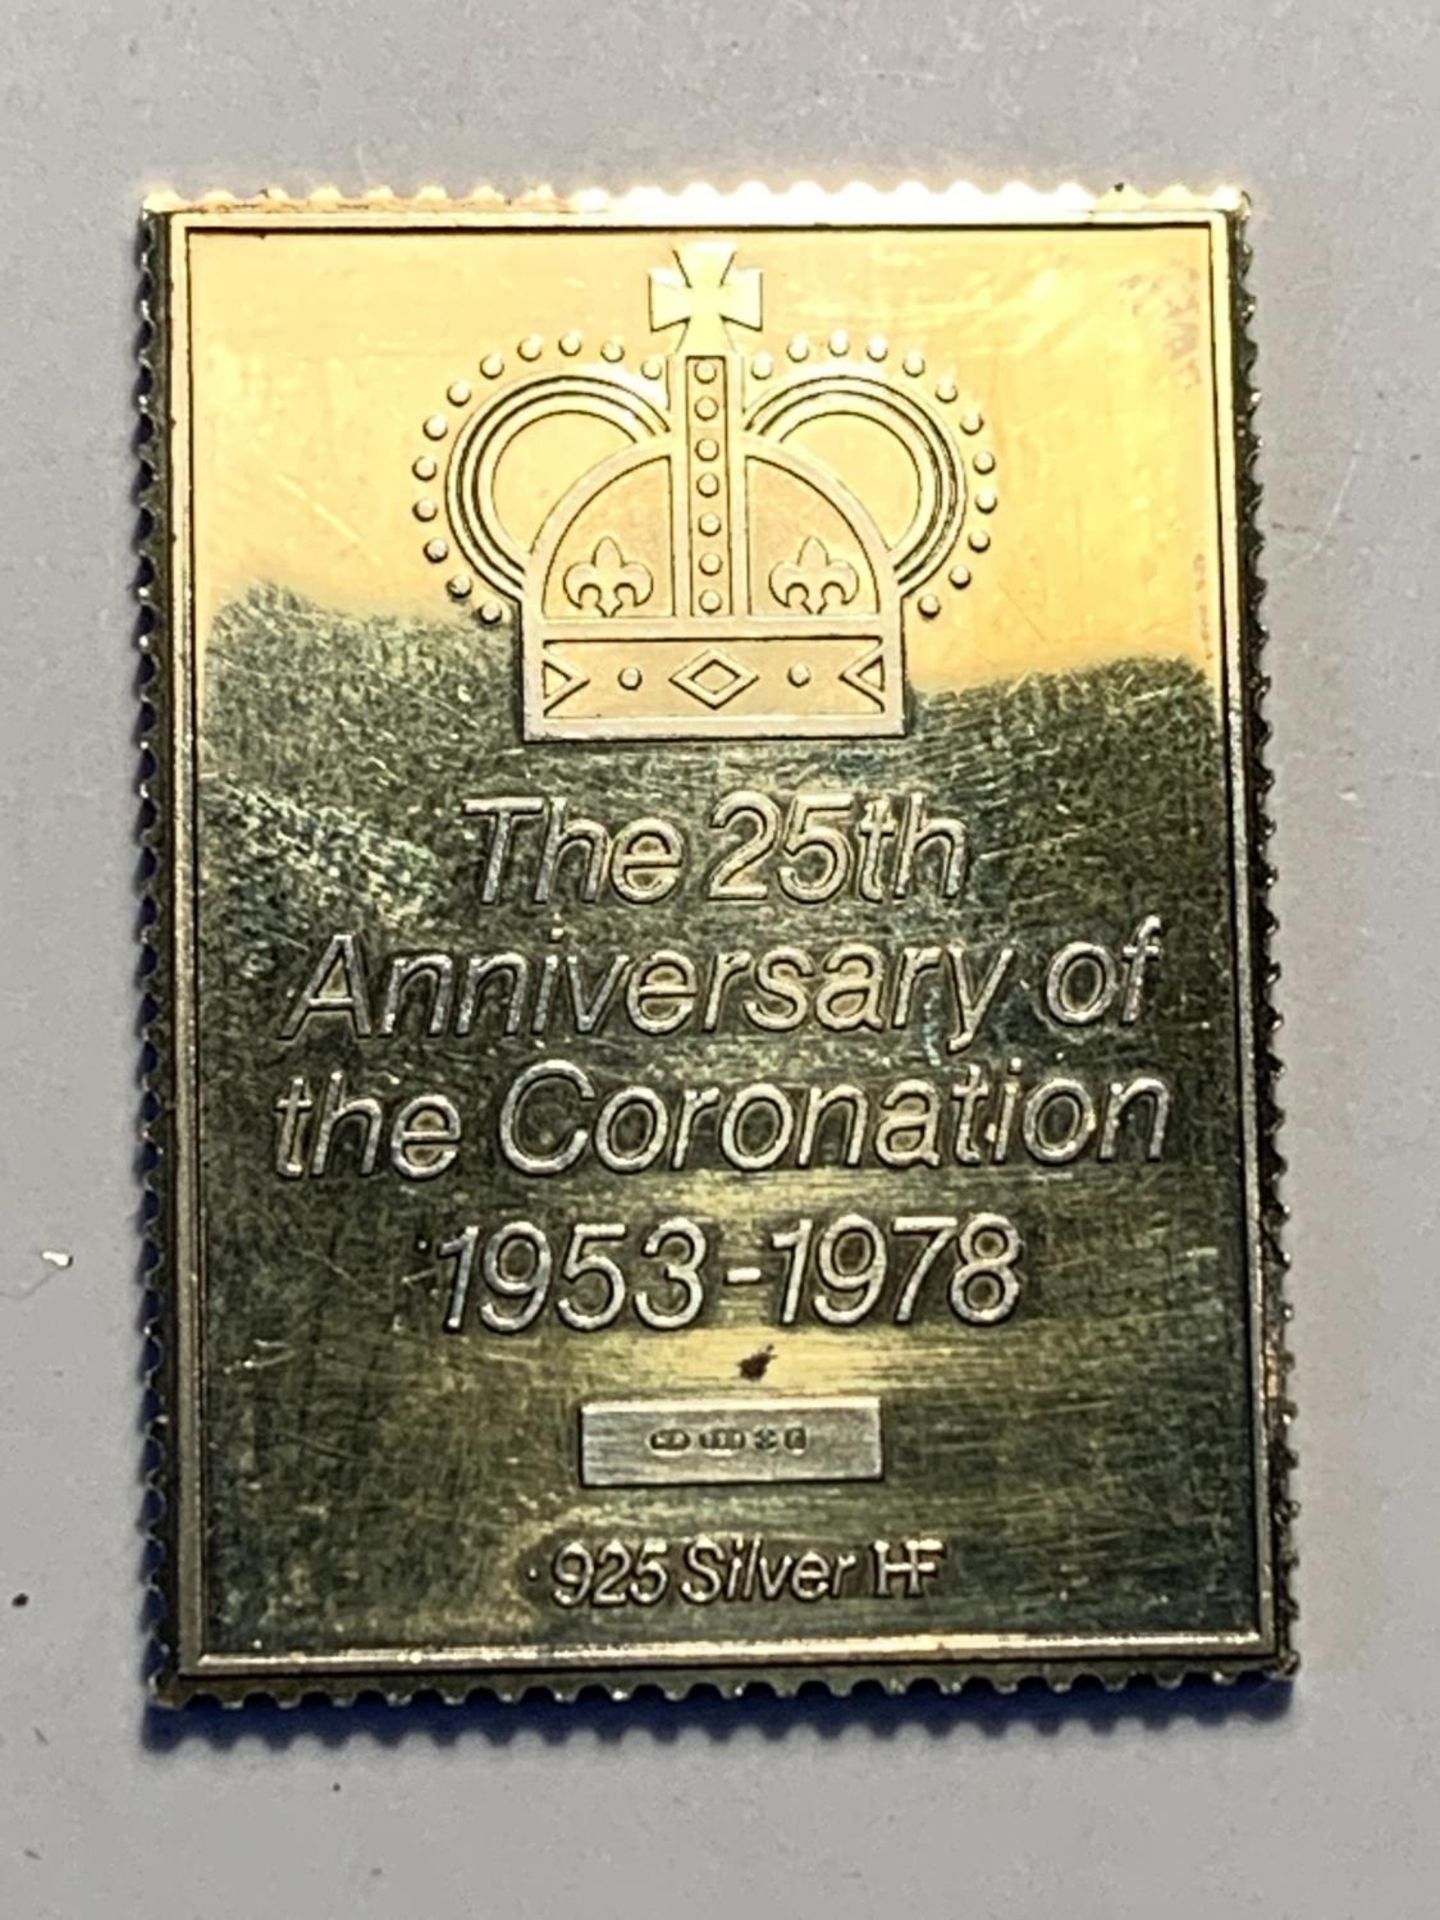 A SILVER GILT 10 1/2D STAMP - Image 2 of 2